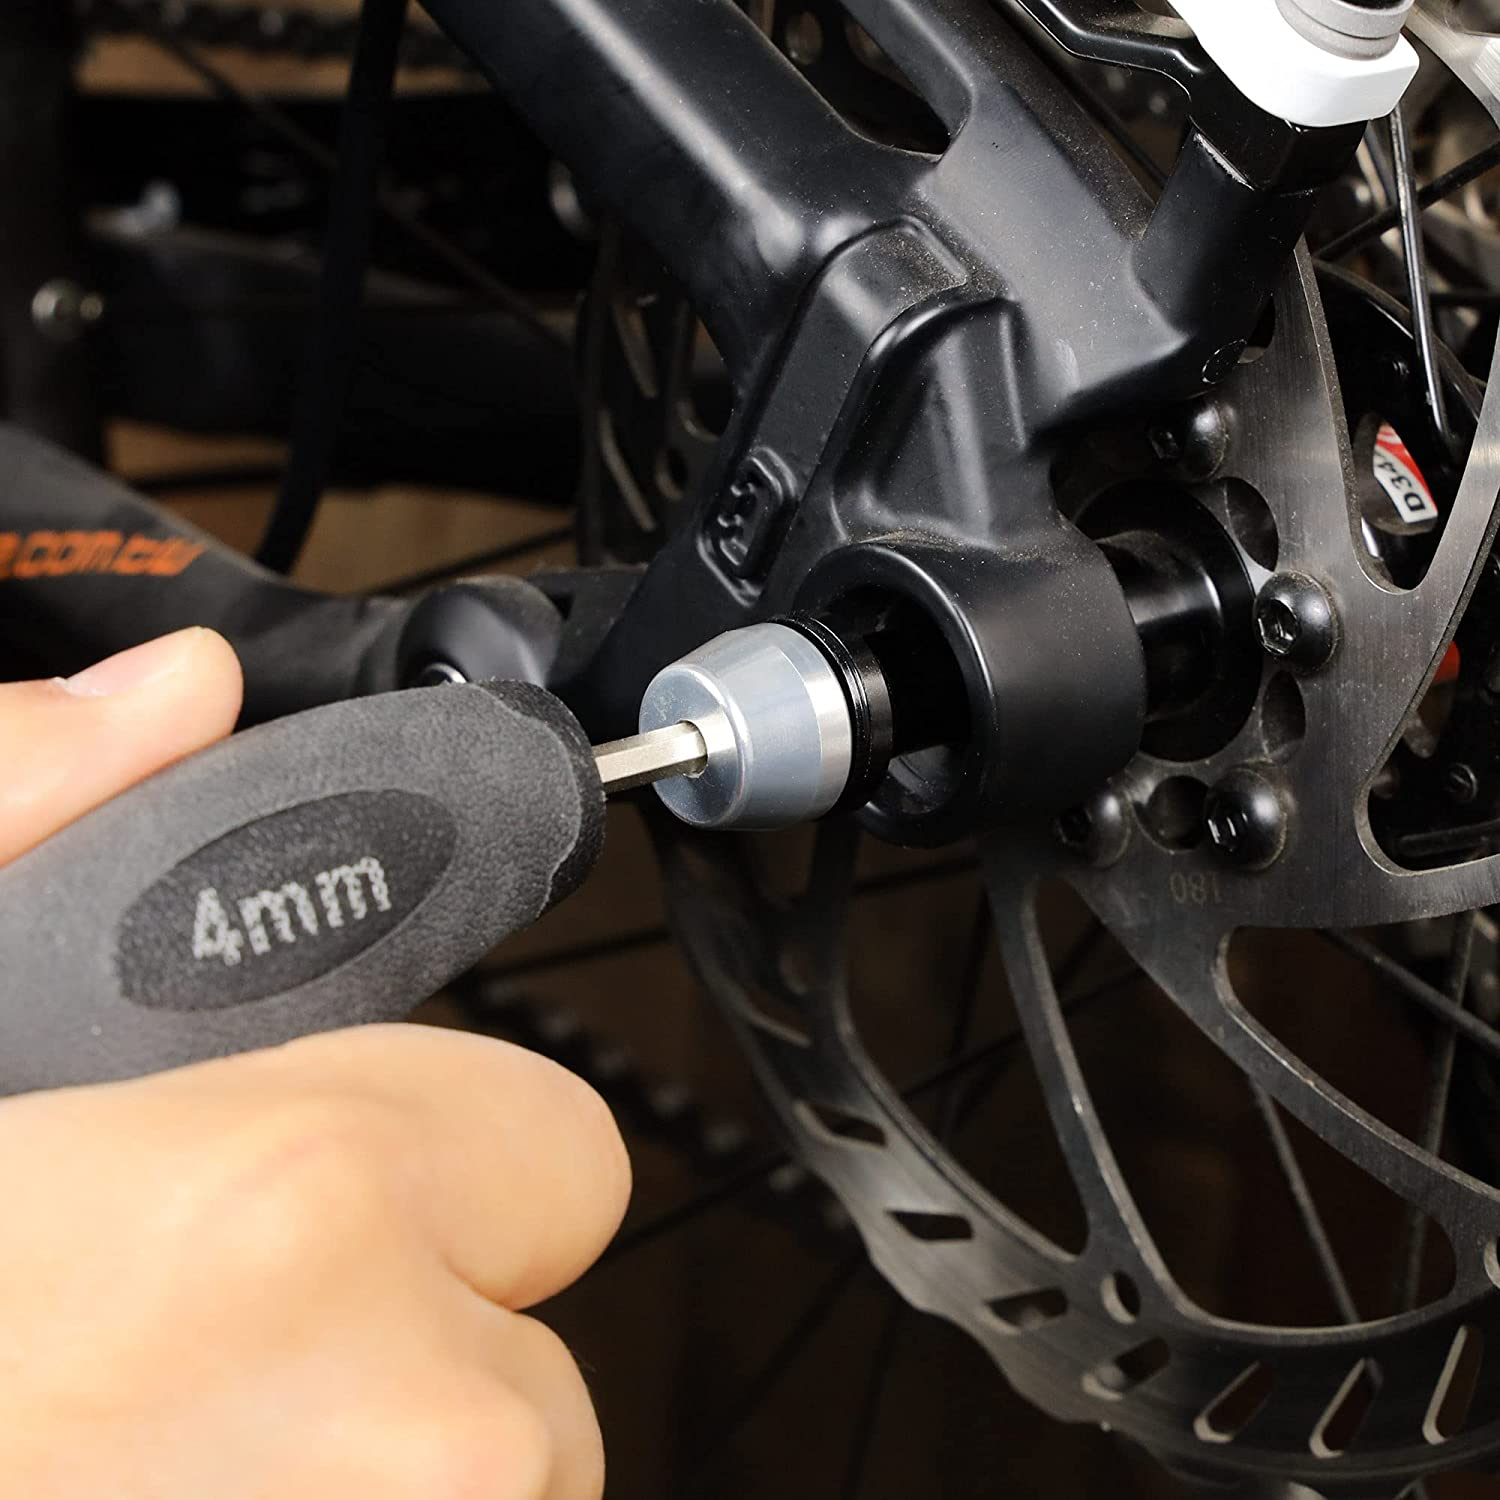 To tighten your mountain bike chain you will have to loosen the rear wheel thru-axle using a rear wheel skewer.